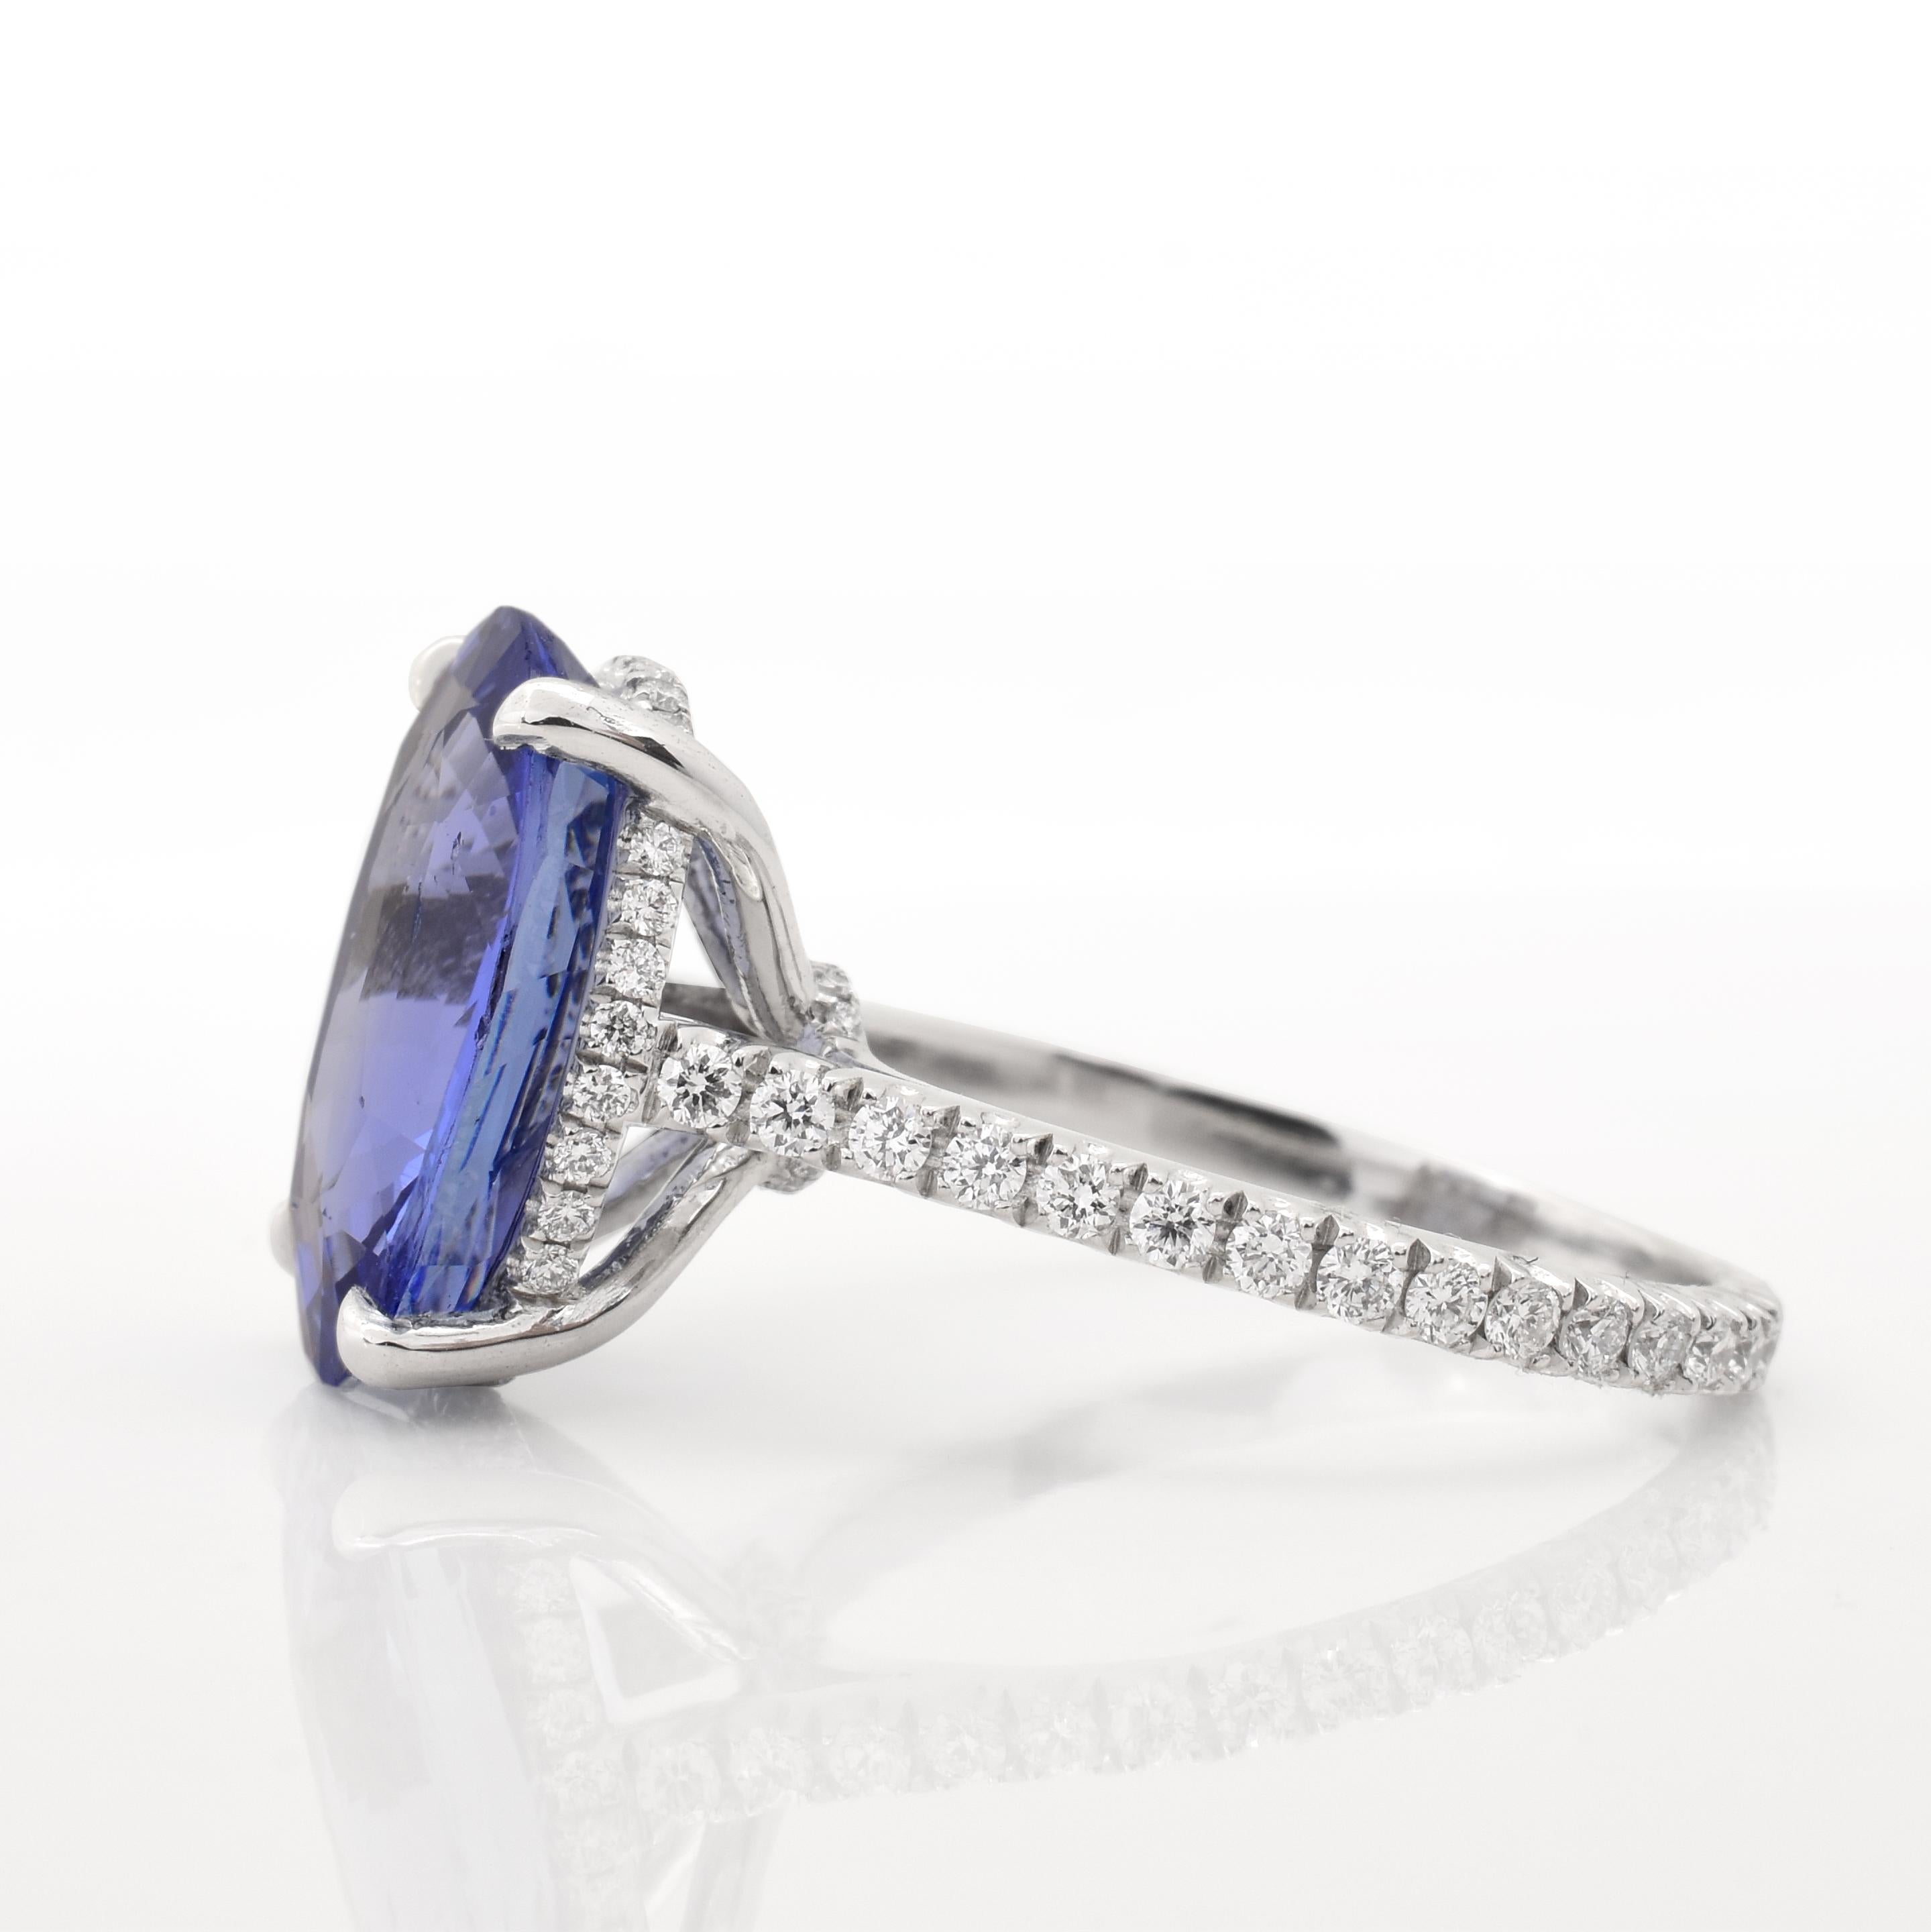 Oval Cut GIA Certified 6.11 Carat Sapphire Diamond Ring For Sale